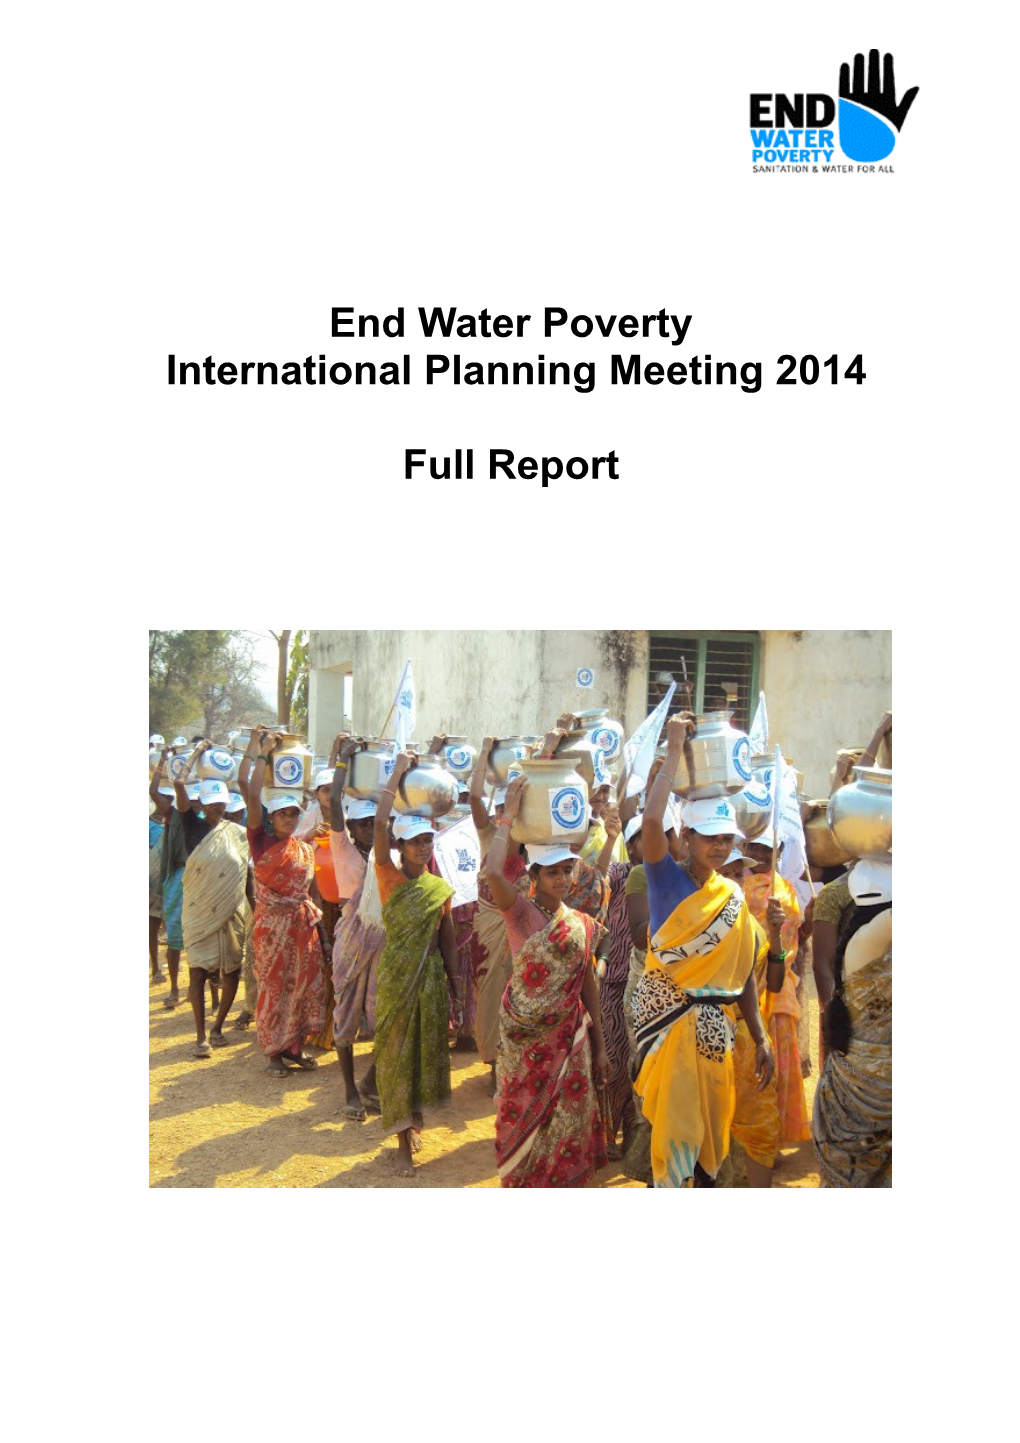 End Water Poverty and Freshwater Action Network International Advocacy Planning Meeting